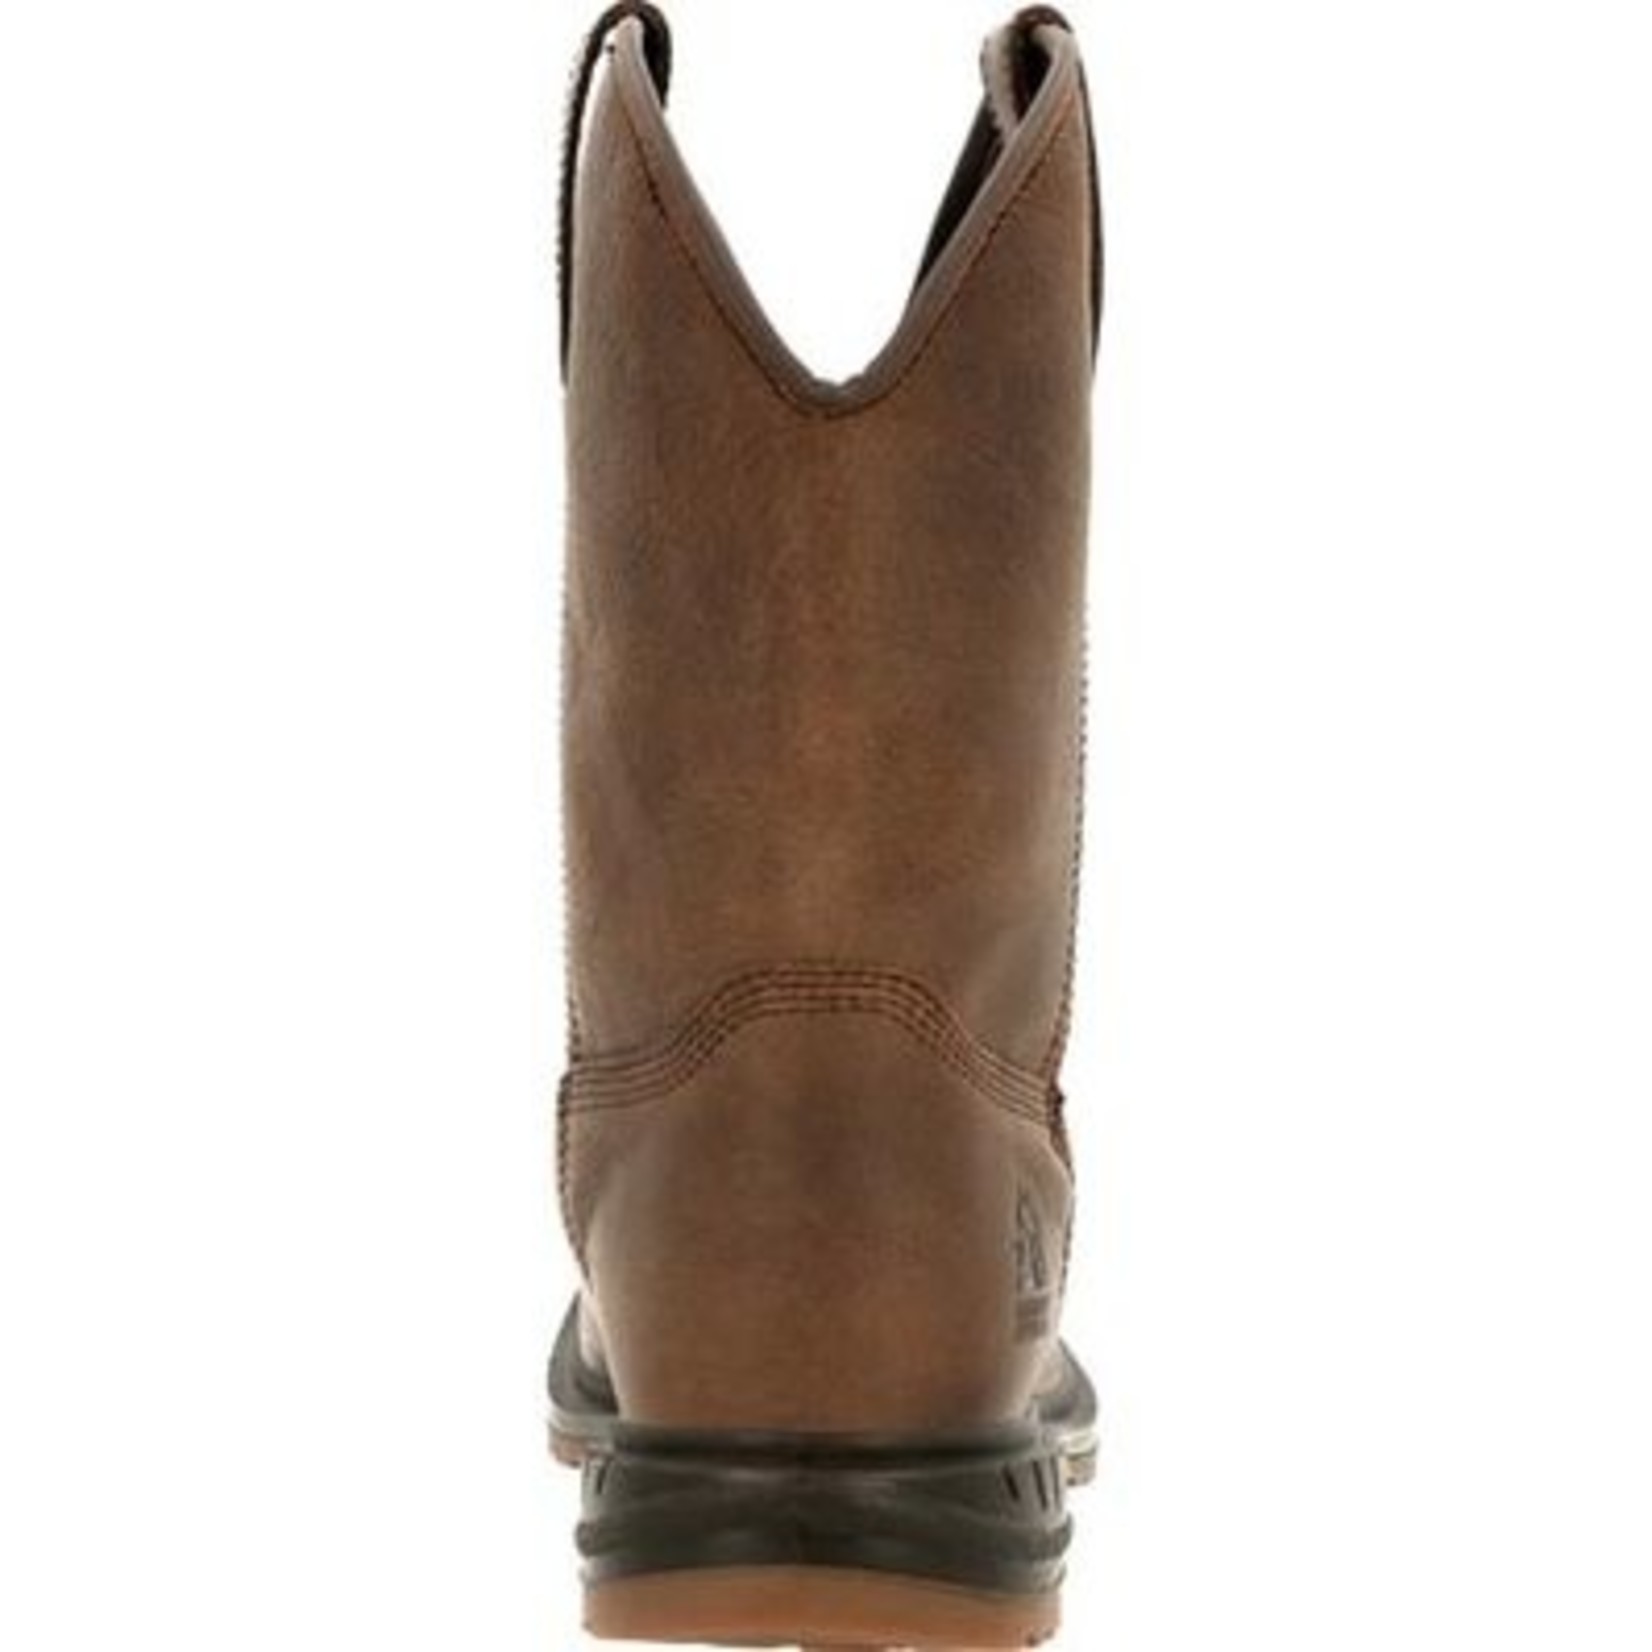 ROCKY BOOTS 10" WORKSMART WESTERN BOOTS